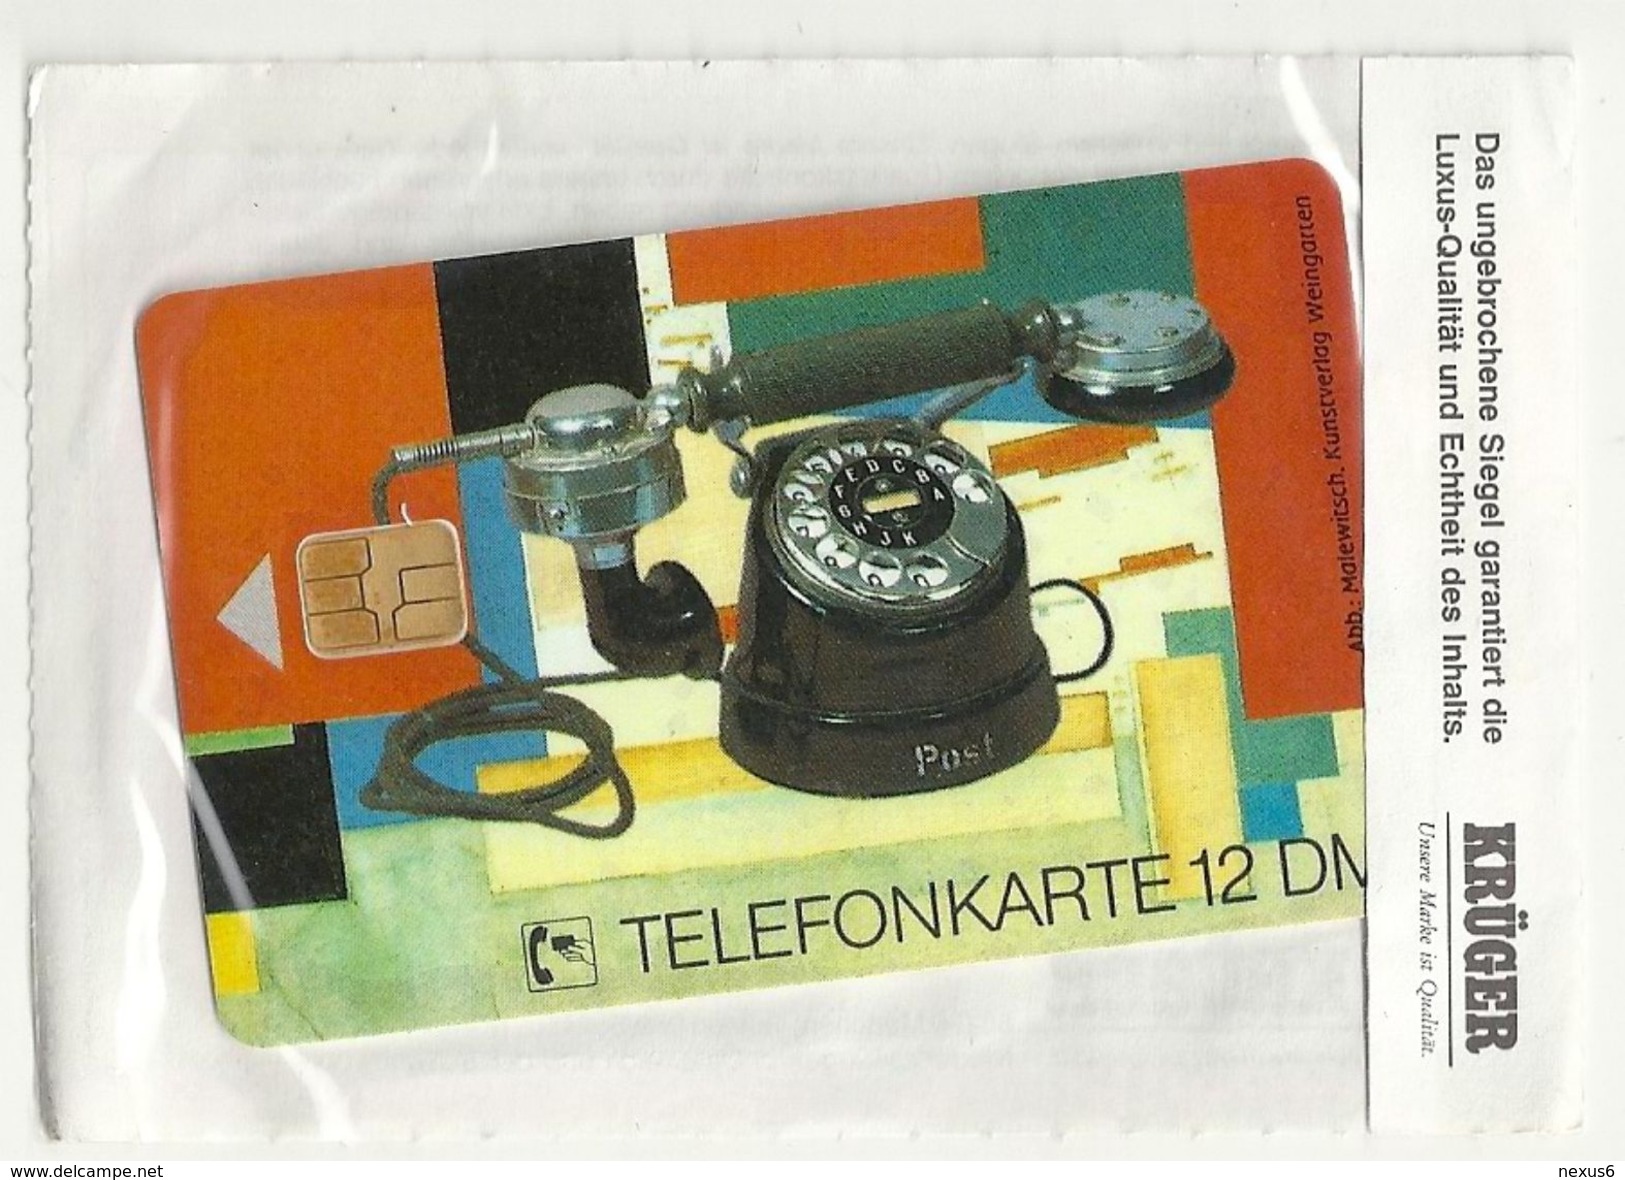 Germany - Alte Telefonapparate 4 - Collector's E08 08.92 - 12DM, 30.000ex, Mint In Kruger - E-Series: Editionsausgabe Der Dt. Postreklame